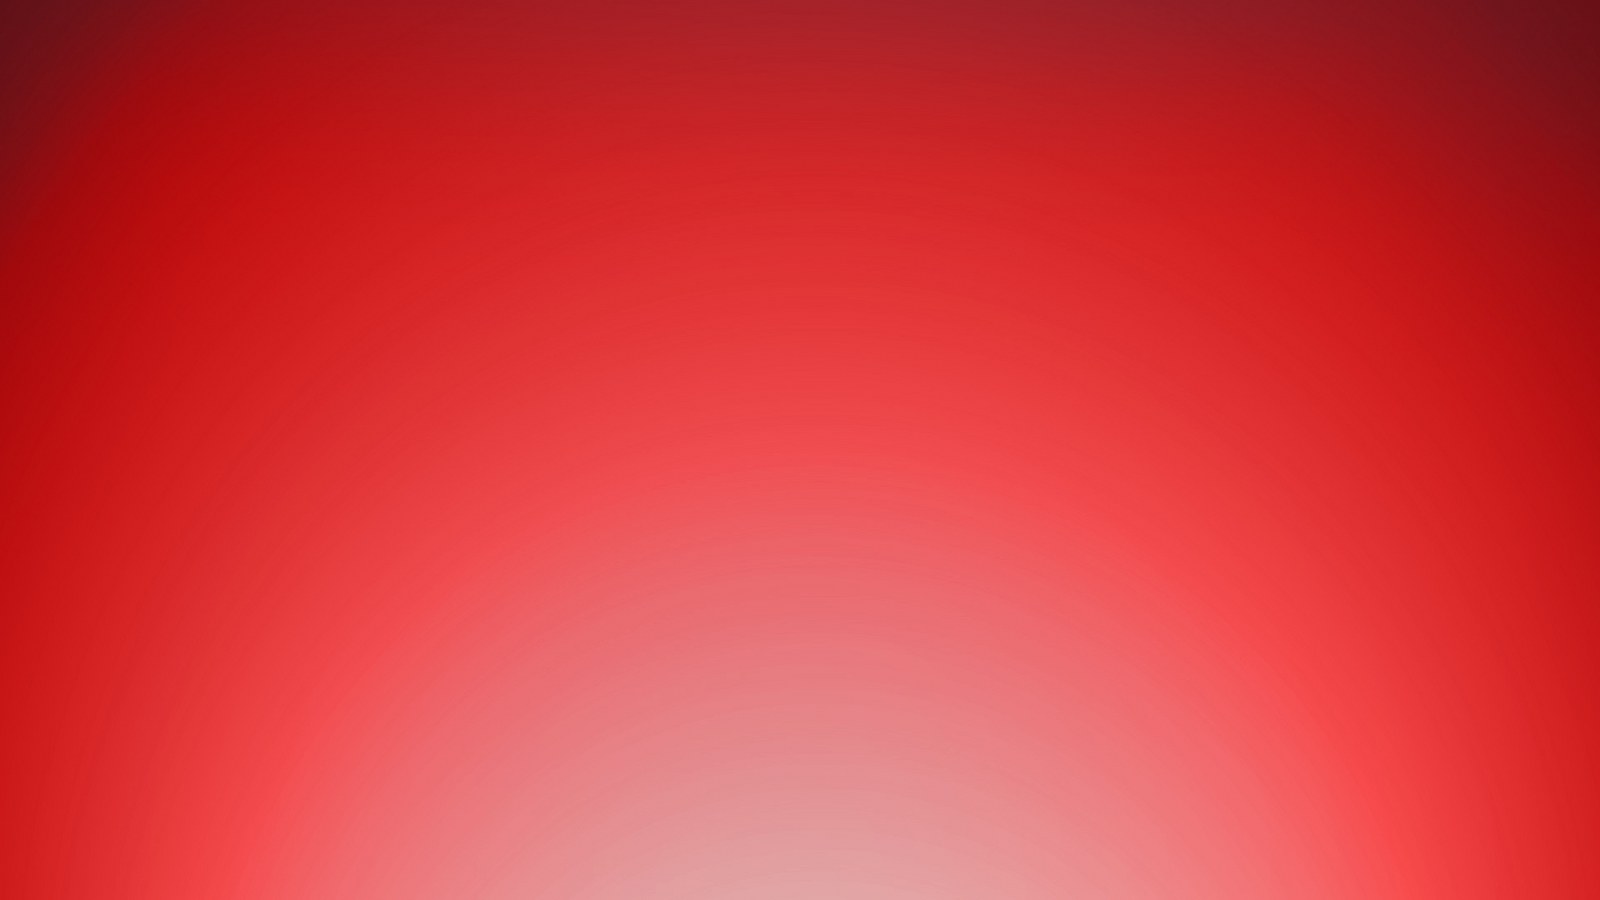 Red Background Texture S Wallpaper